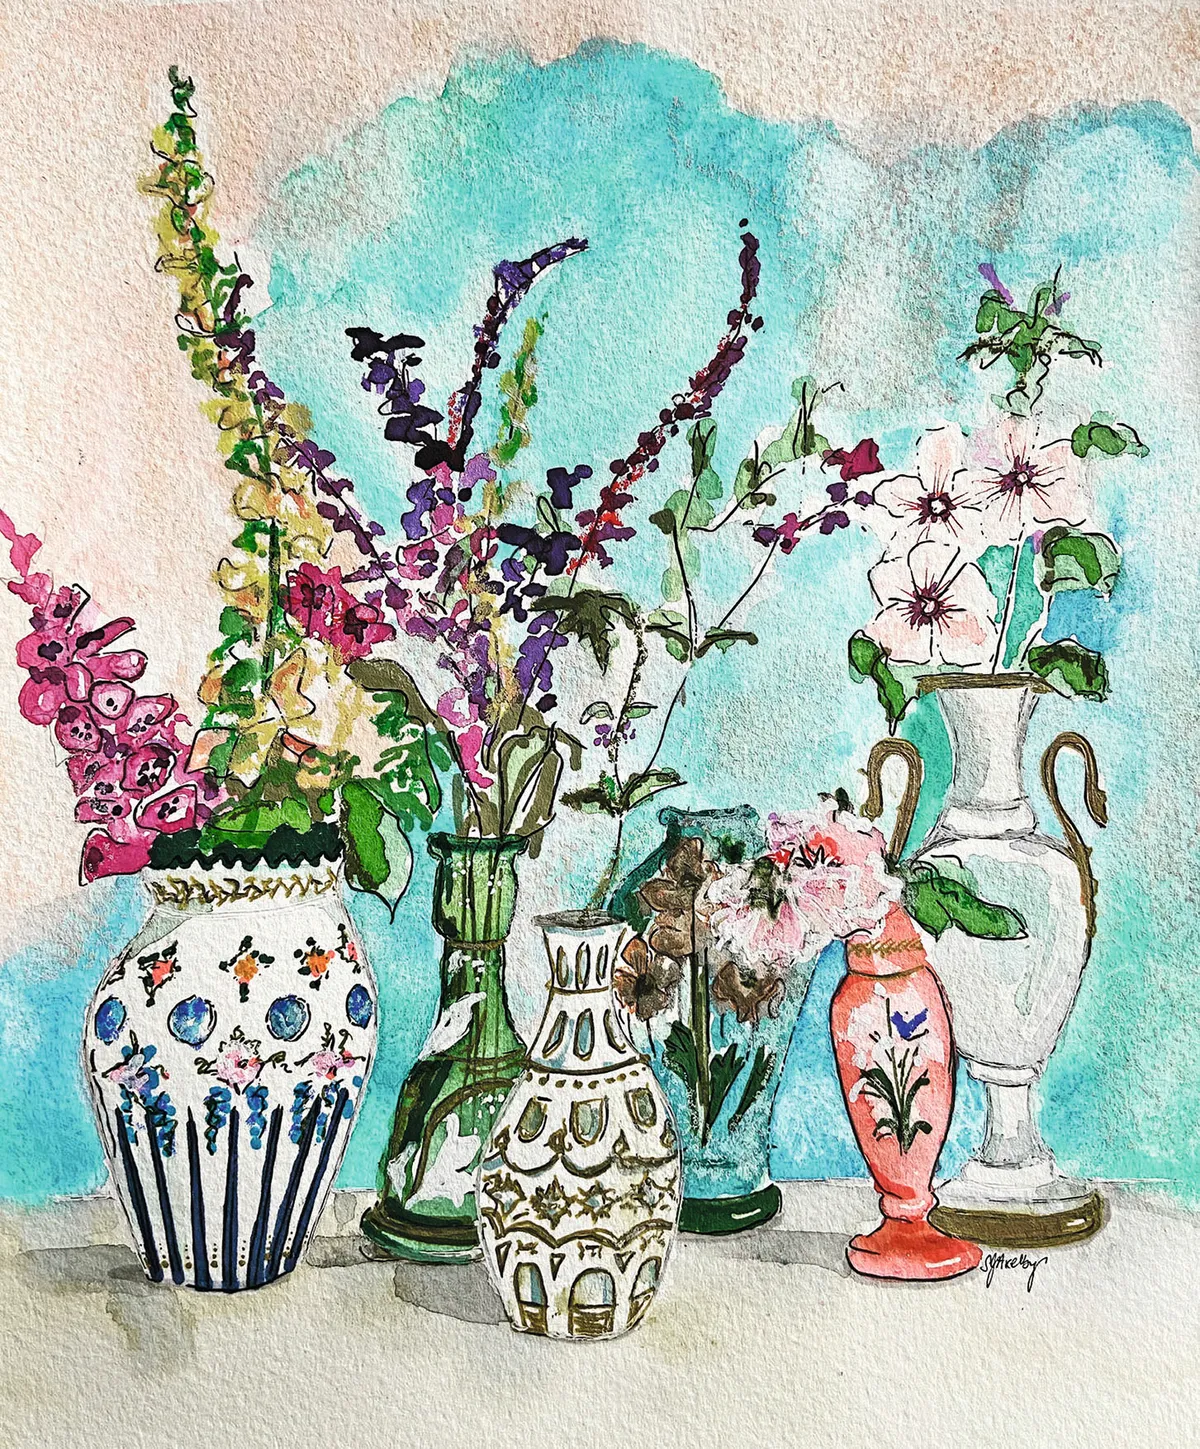 A painting of antique vases and flowers inspired by a scene in Homes & Antiques by artist SJ Axelby.